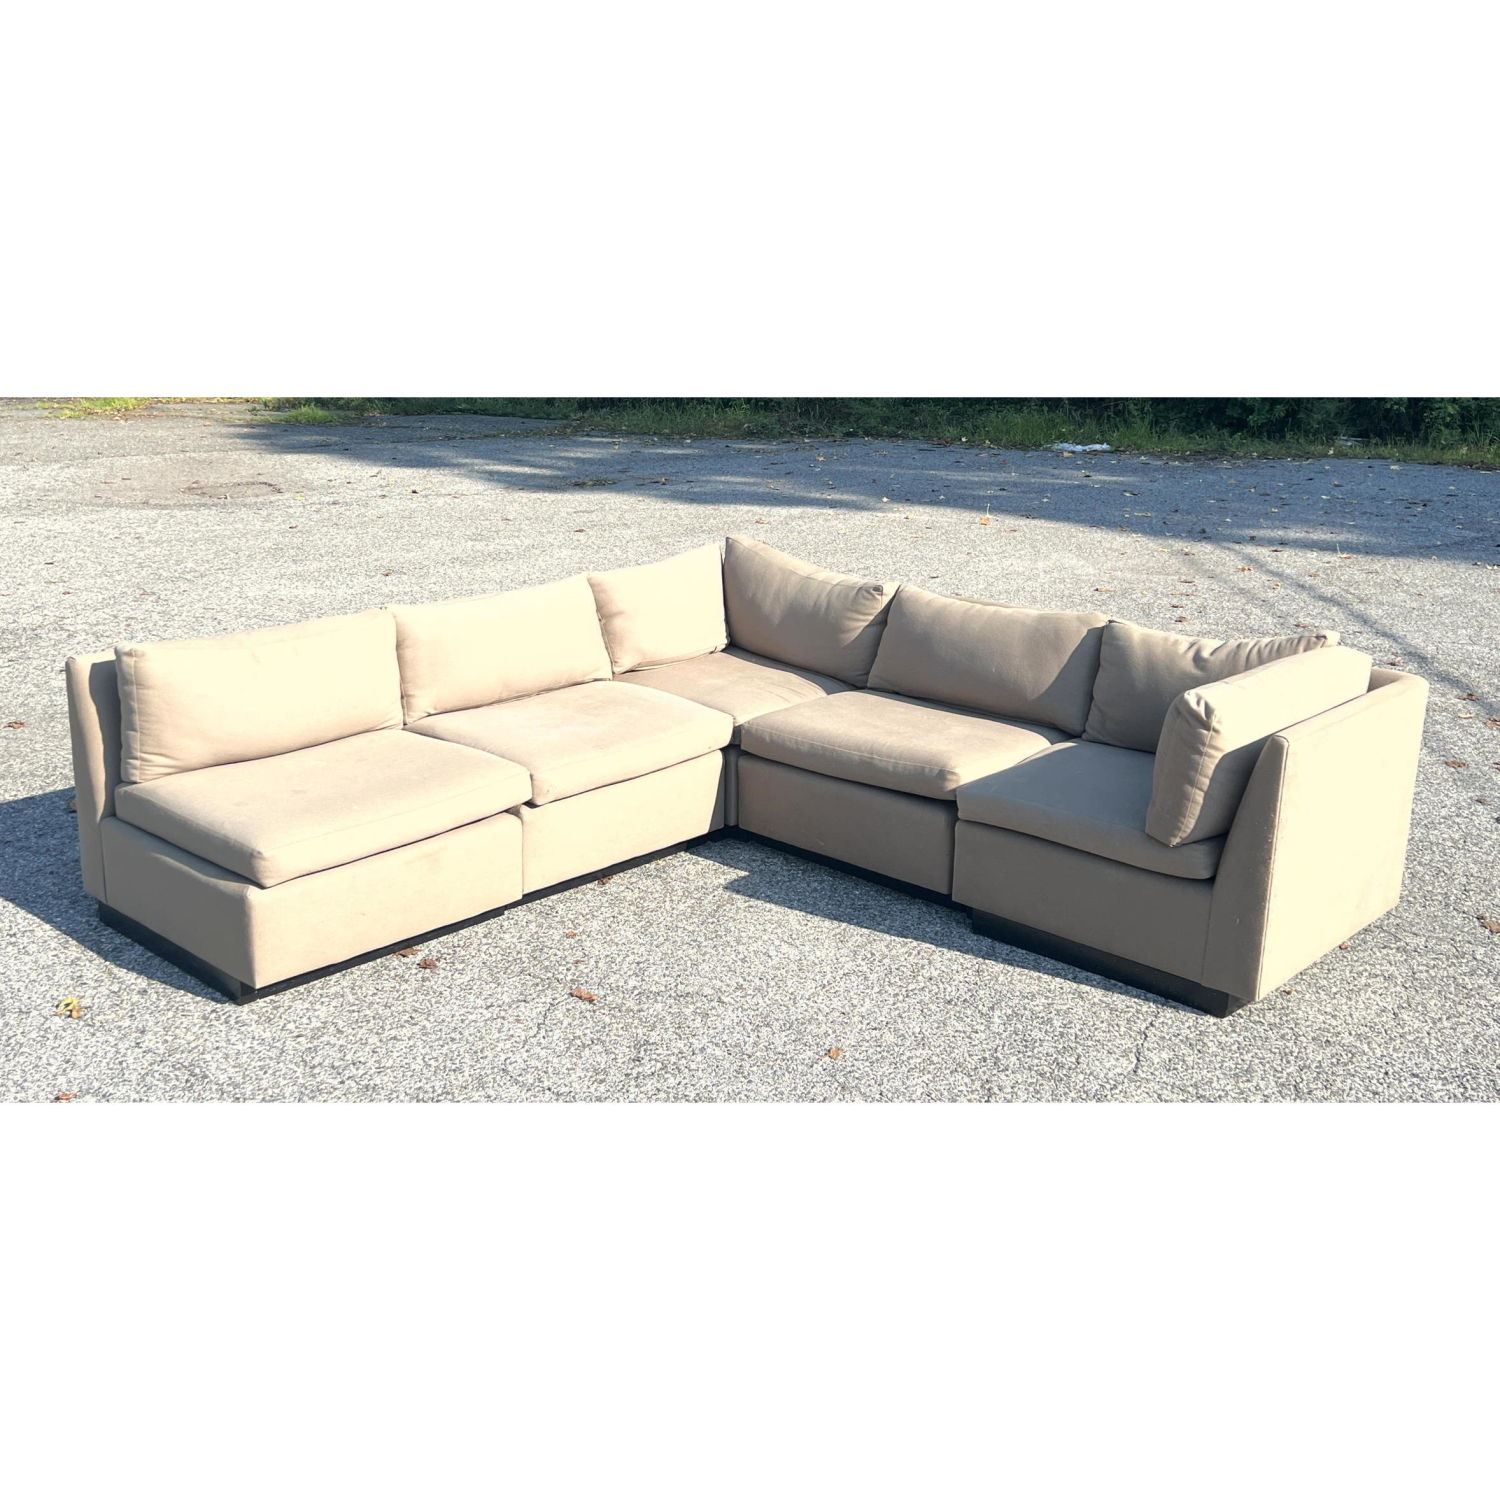 5pc Modernist Sectional Sofa Pit